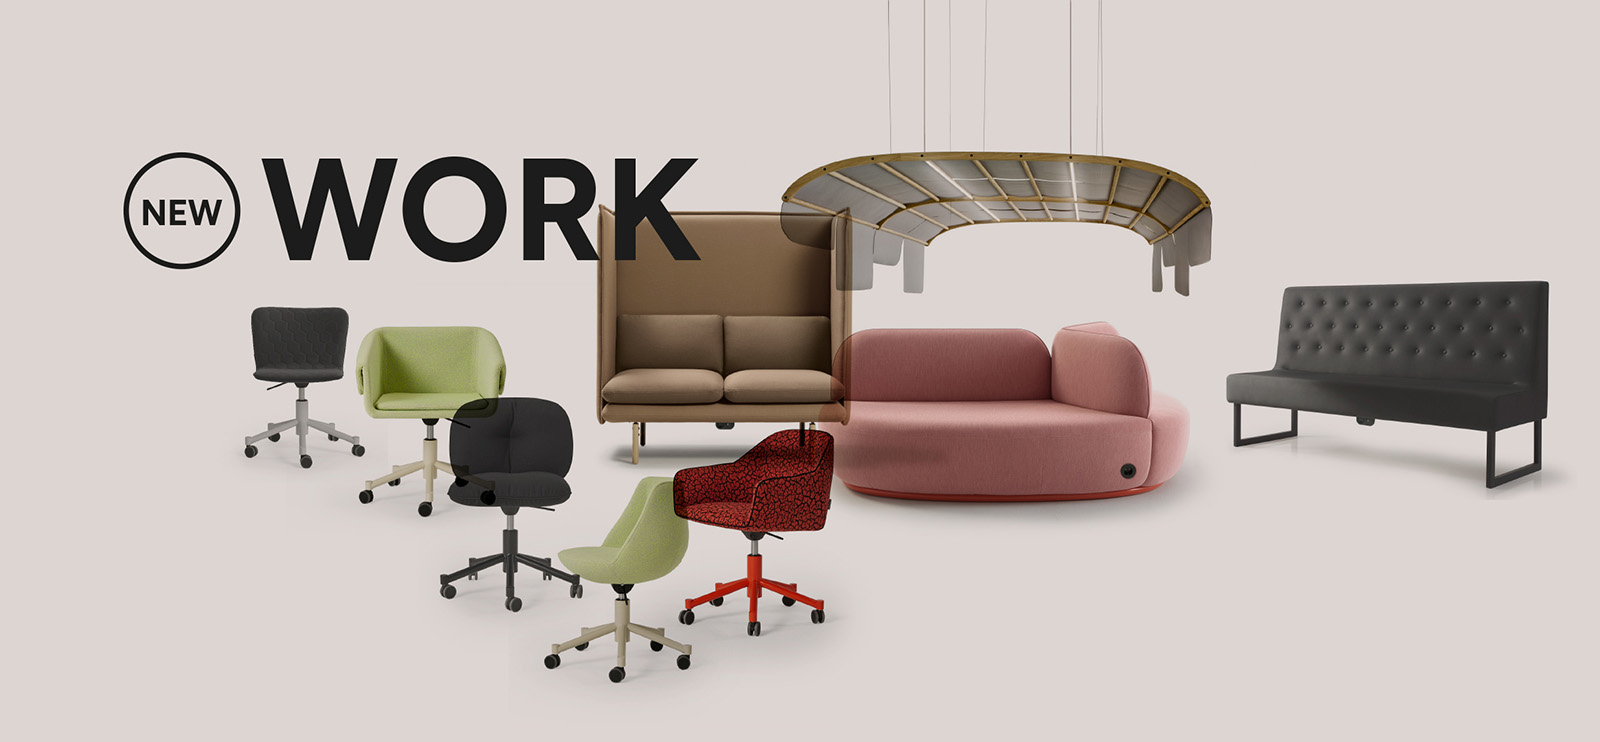 New Work by Sancal